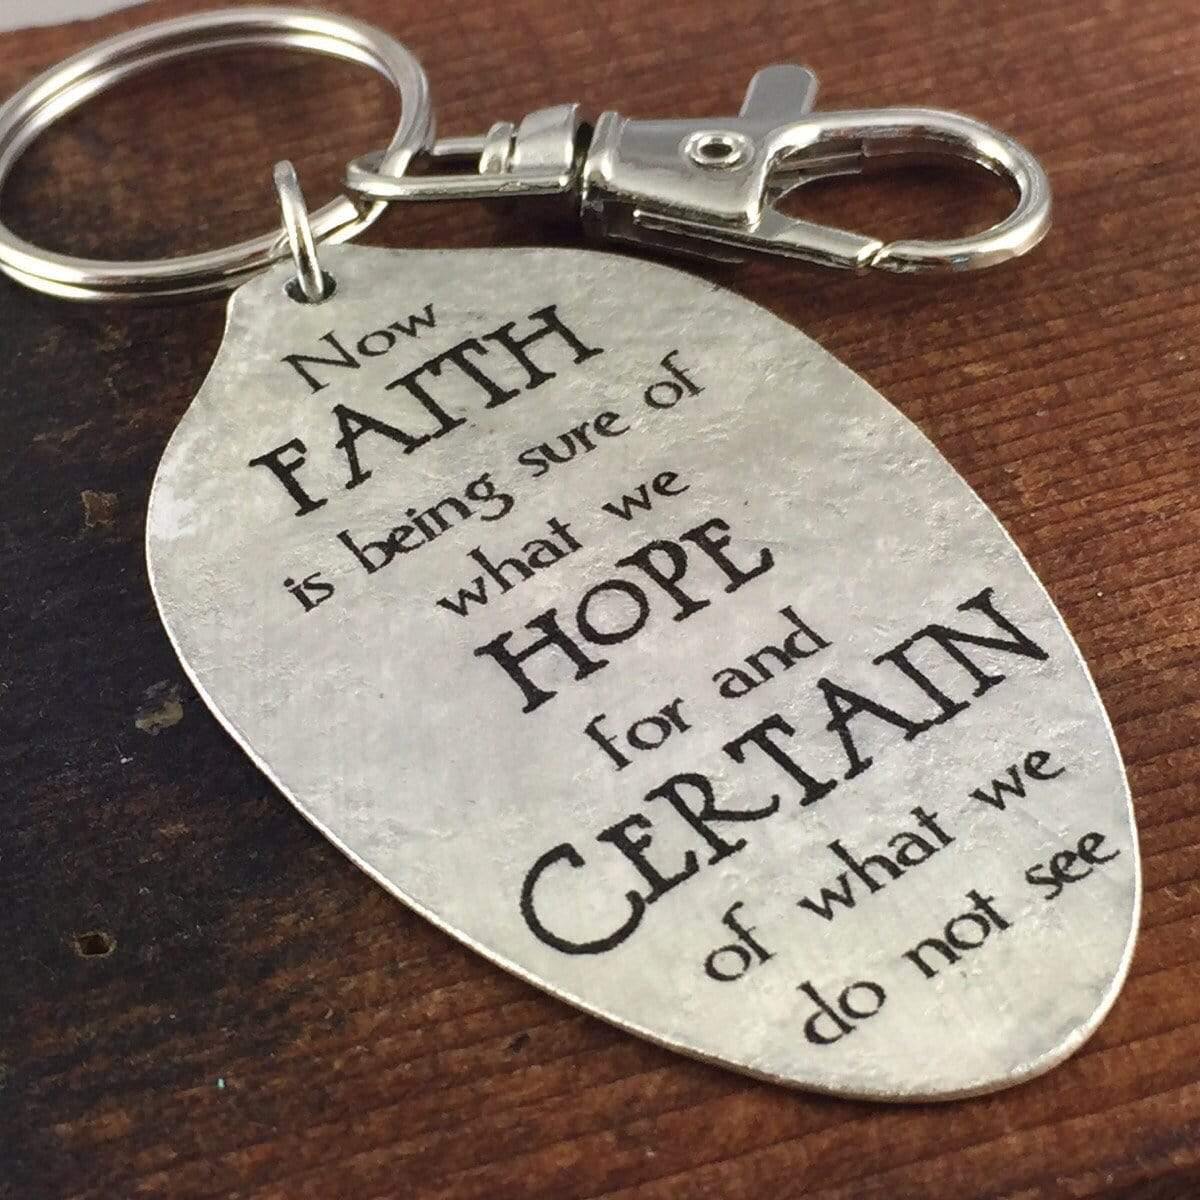 Faith is being sure of what we hope for spoon keychain by kyleemae designs